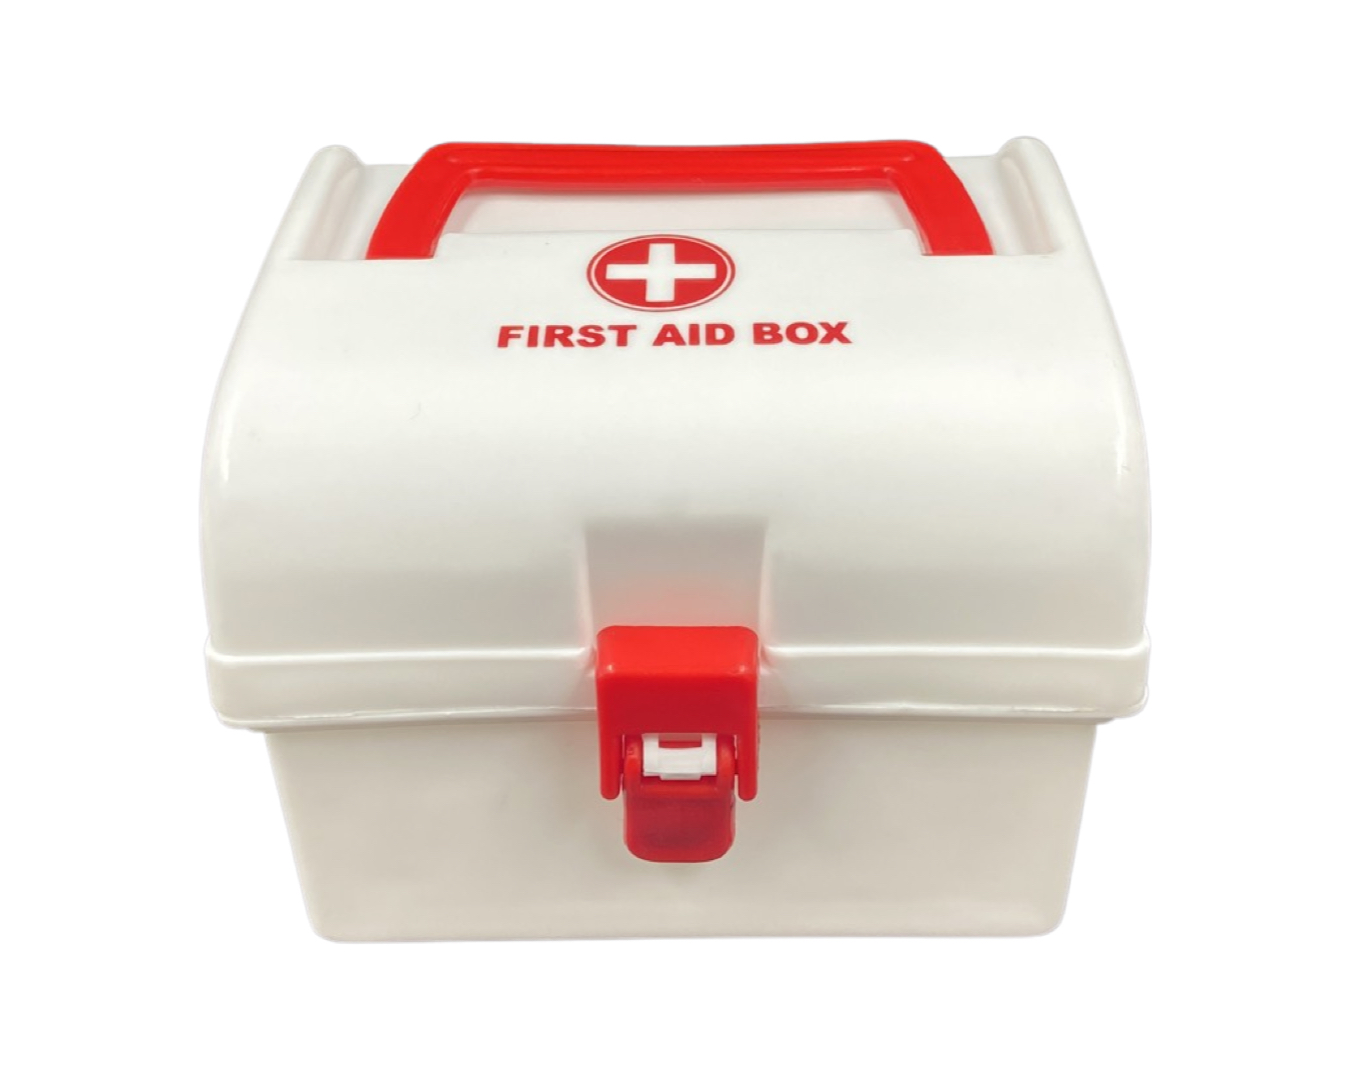 /Small First Aid Box